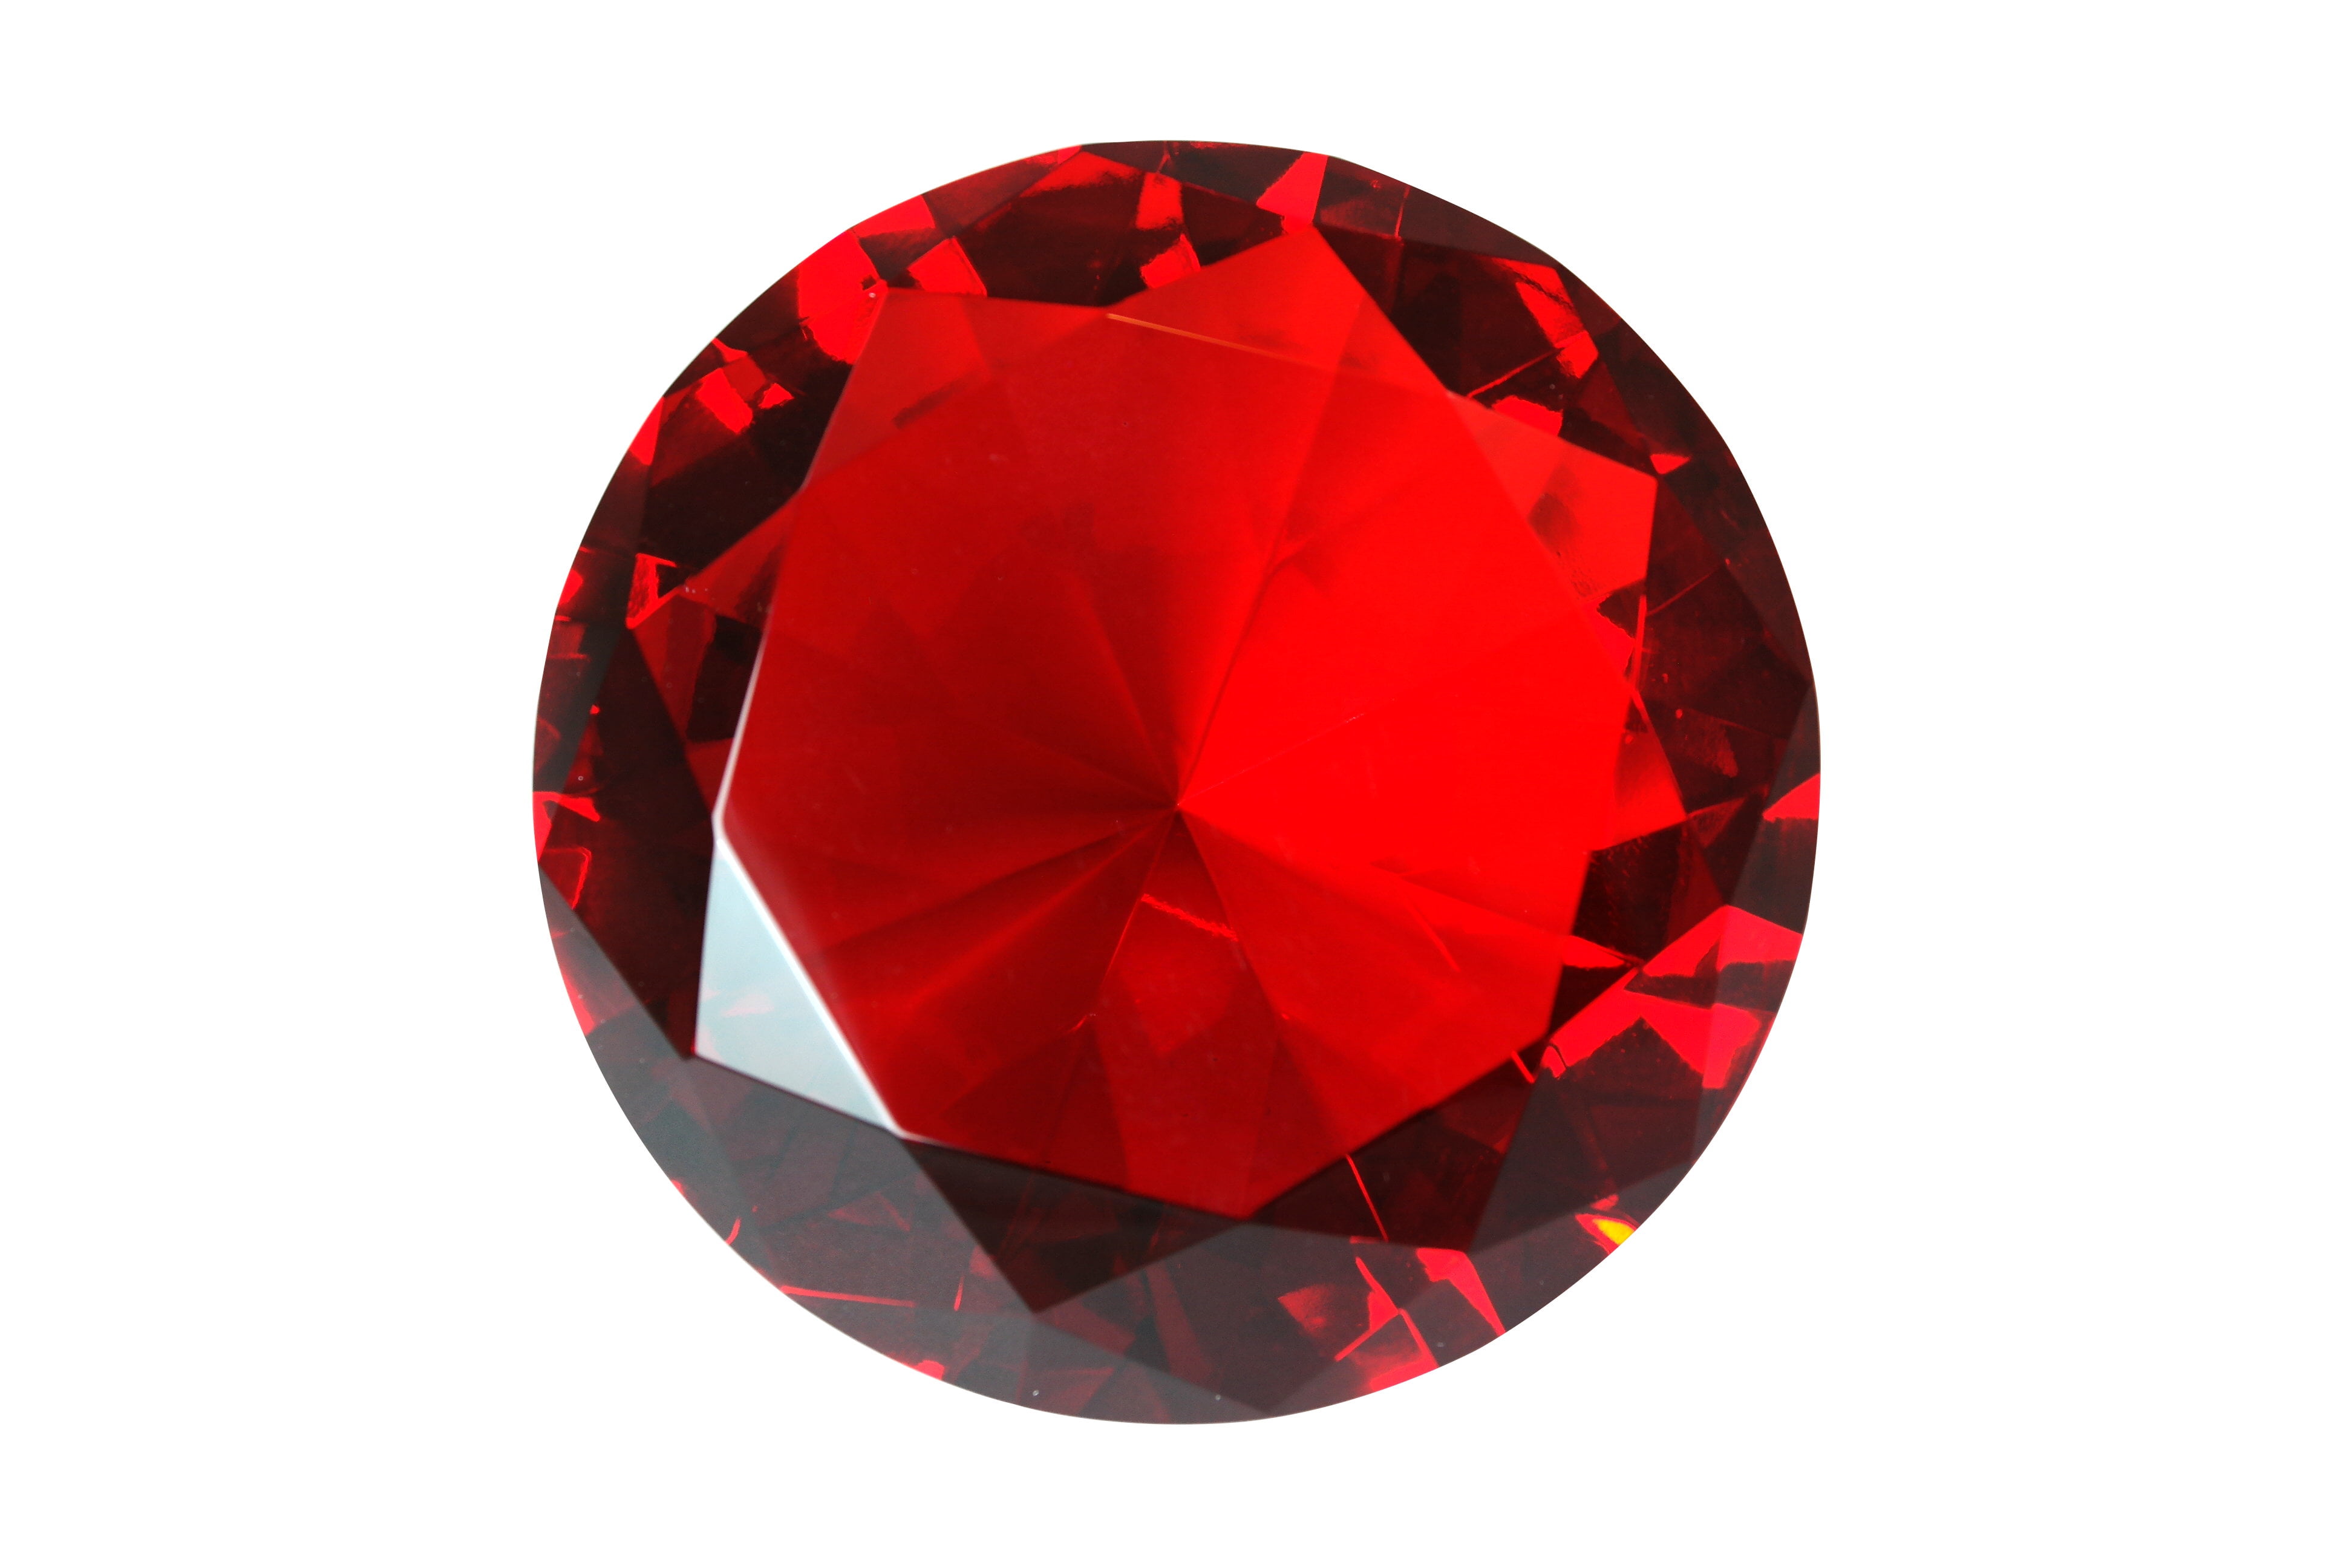 Big 100mm Deep Ruby Red 100 mm Crystal Diamond Jewel Giant Paperweight 